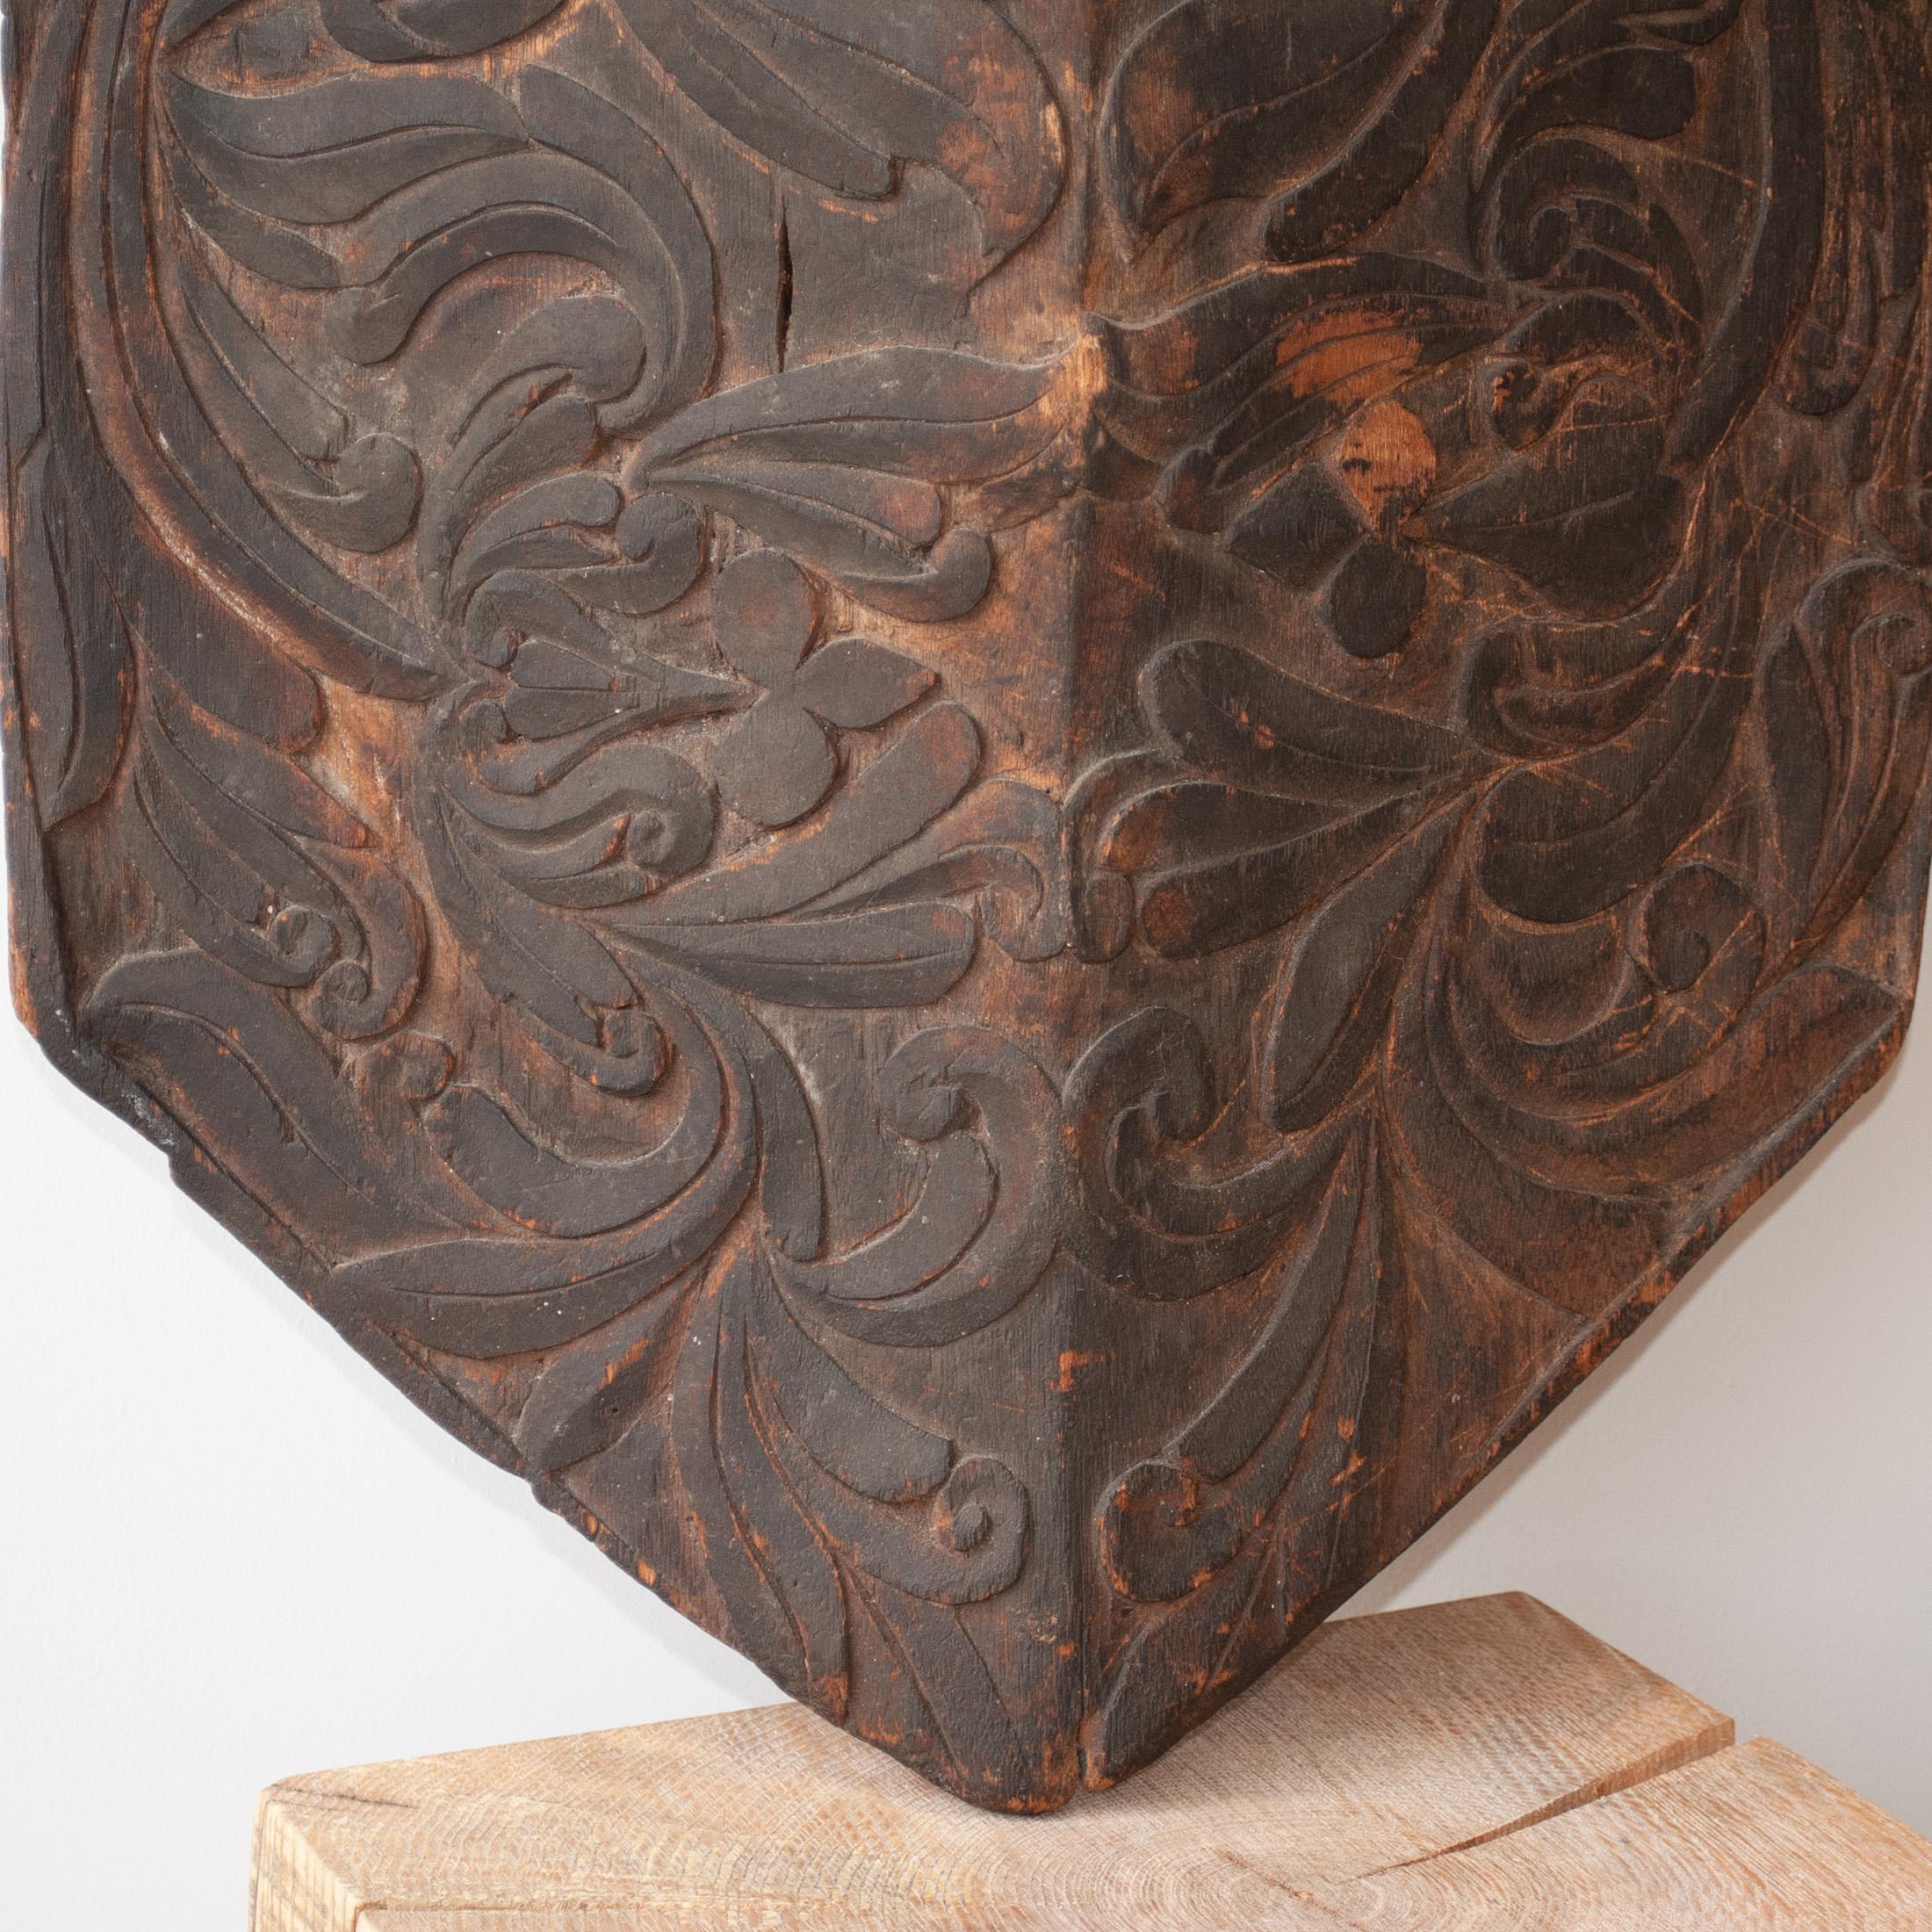 A rare hand carved Dayak tribal shield from Kalimantan/Borneo, Indonesia. These shields were made by the Dayak Iban tribes for real fighting use and ceremonial rites. Wonderfully carved with swirling tribal motifs from the local Jelutong wood. The